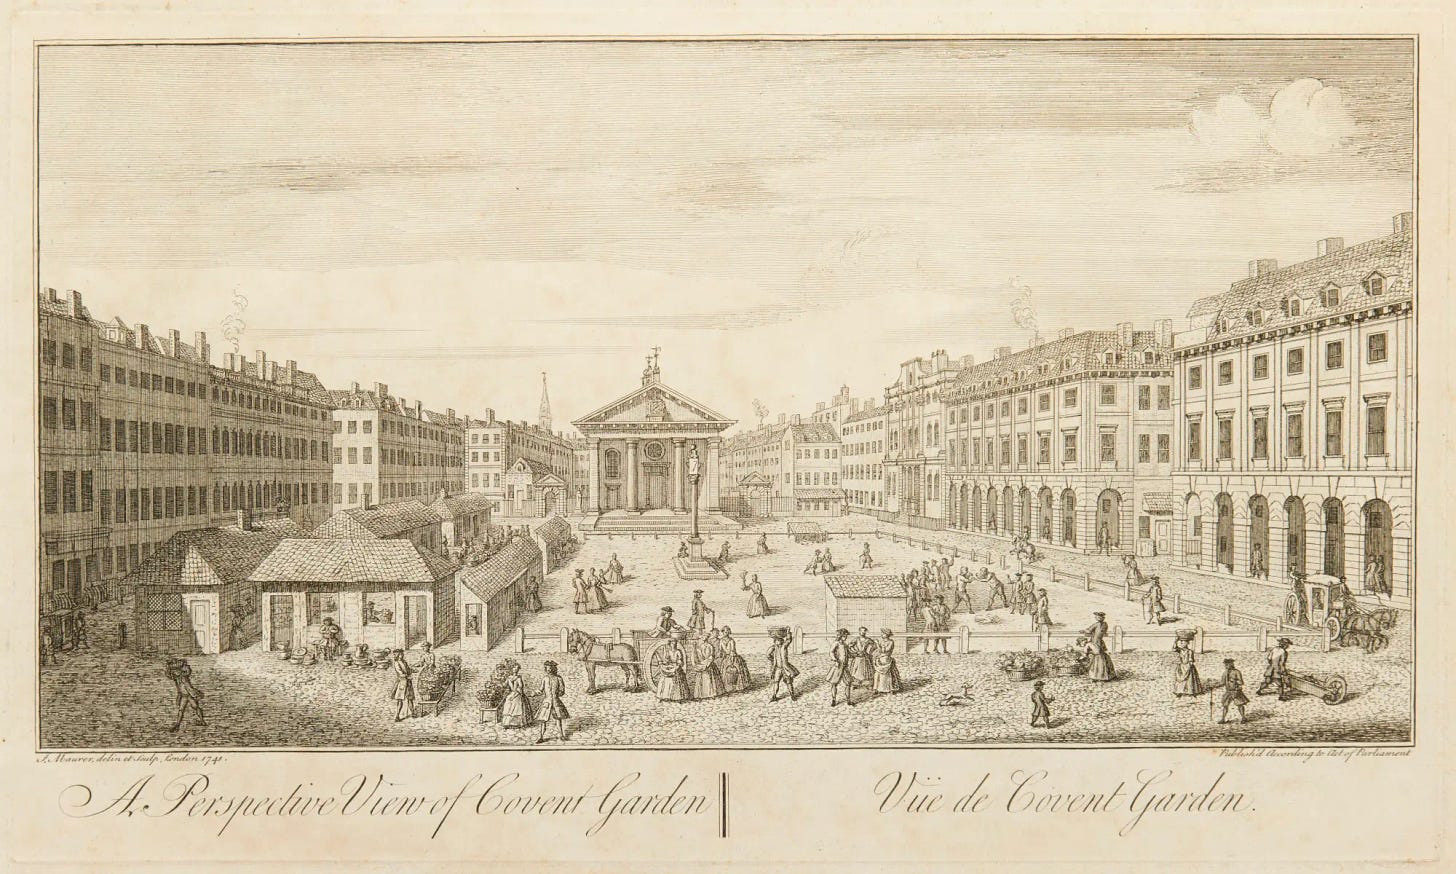 You see towering buildings on either side, surrounding the square. Peddlers sell their wares, a small gathering cheers as two men face off in a boxing match, people chatter, and others go about their day. The view looks west towards St. Paul's Church.